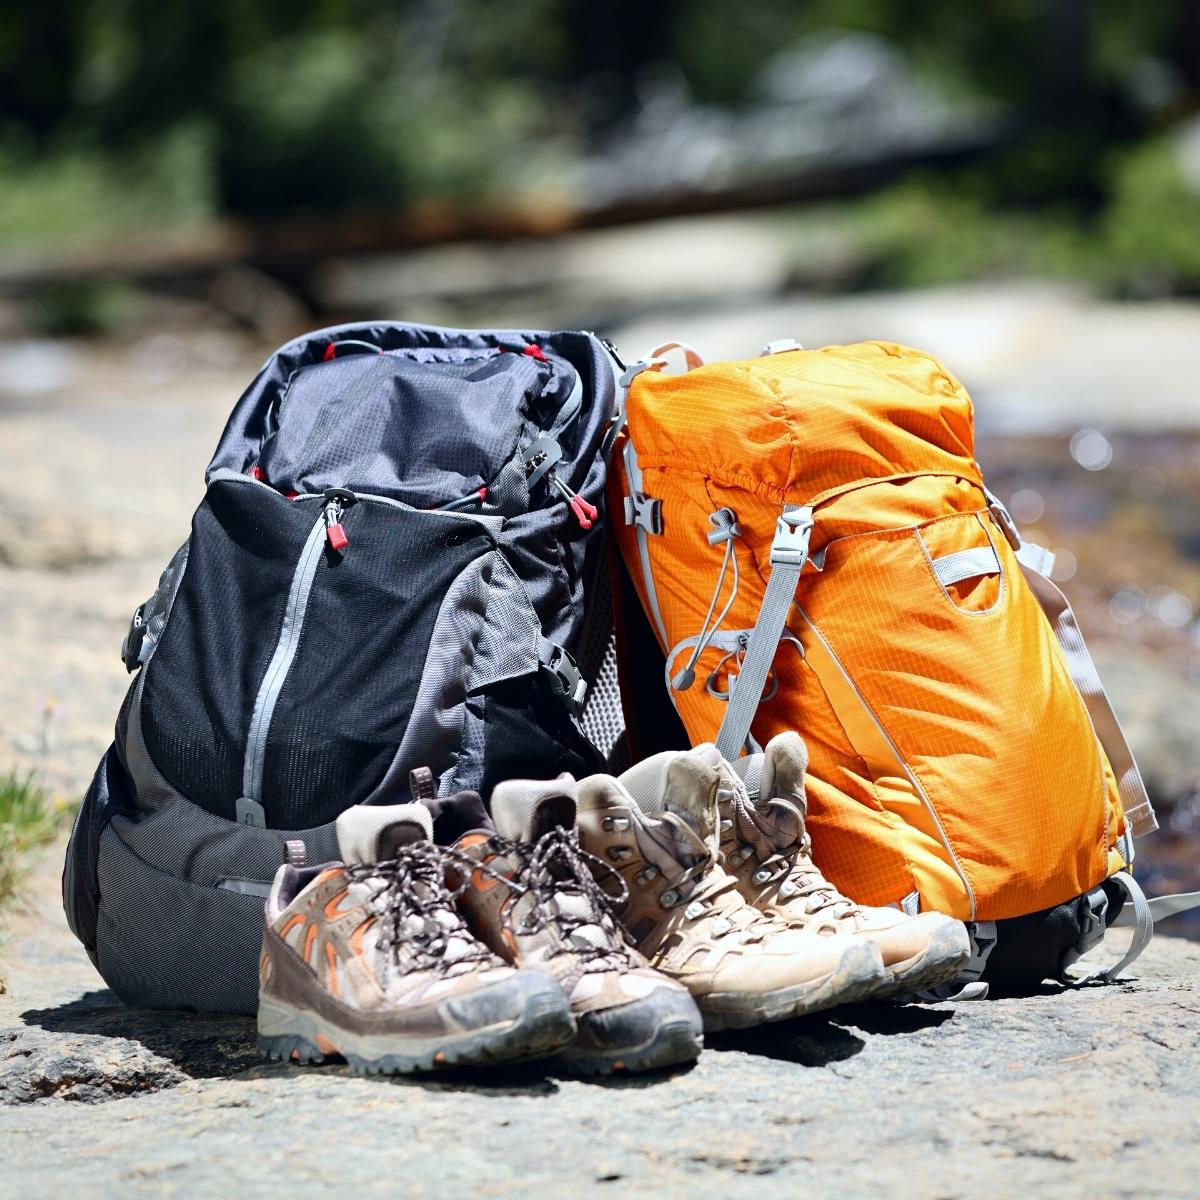 An orange backpack and black backpack side by side with 2 pairs of hiking boots in front.